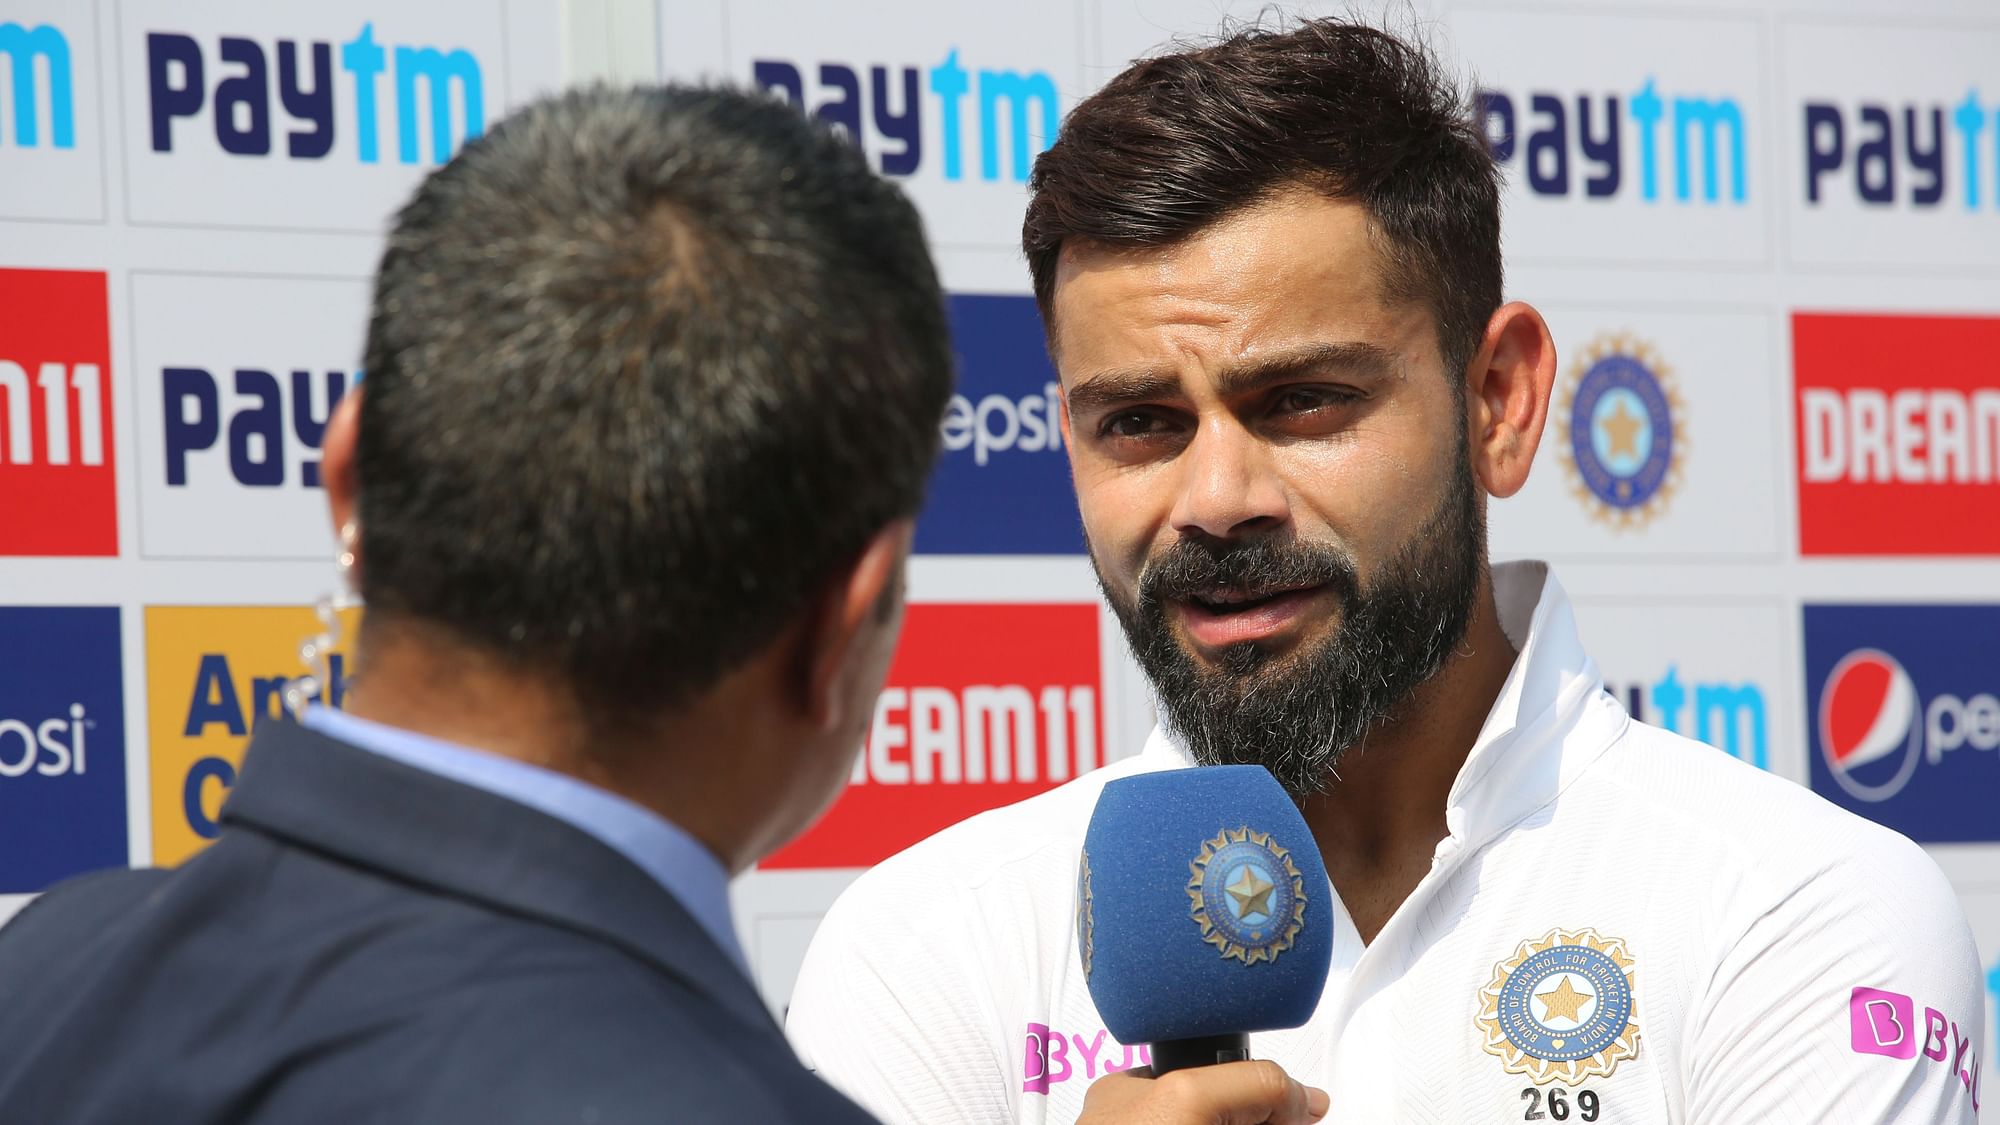 Indian captain Virat Kohli hailed Rohit Sharma, Mayank Agarwal and the bowlers for their performances after their win.